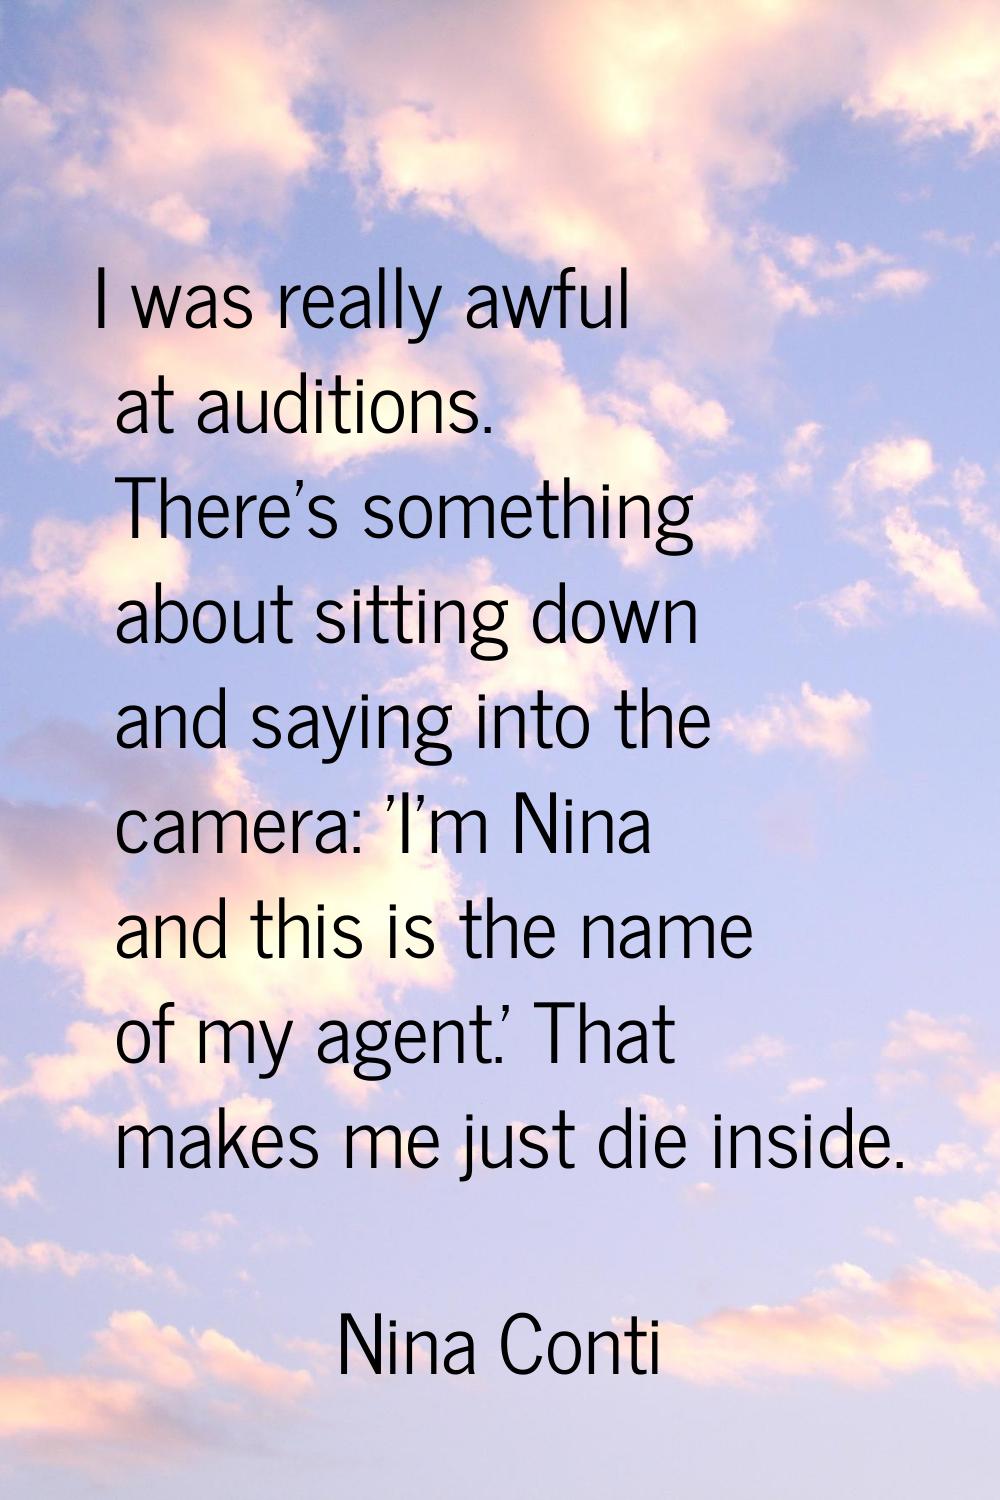 I was really awful at auditions. There's something about sitting down and saying into the camera: '